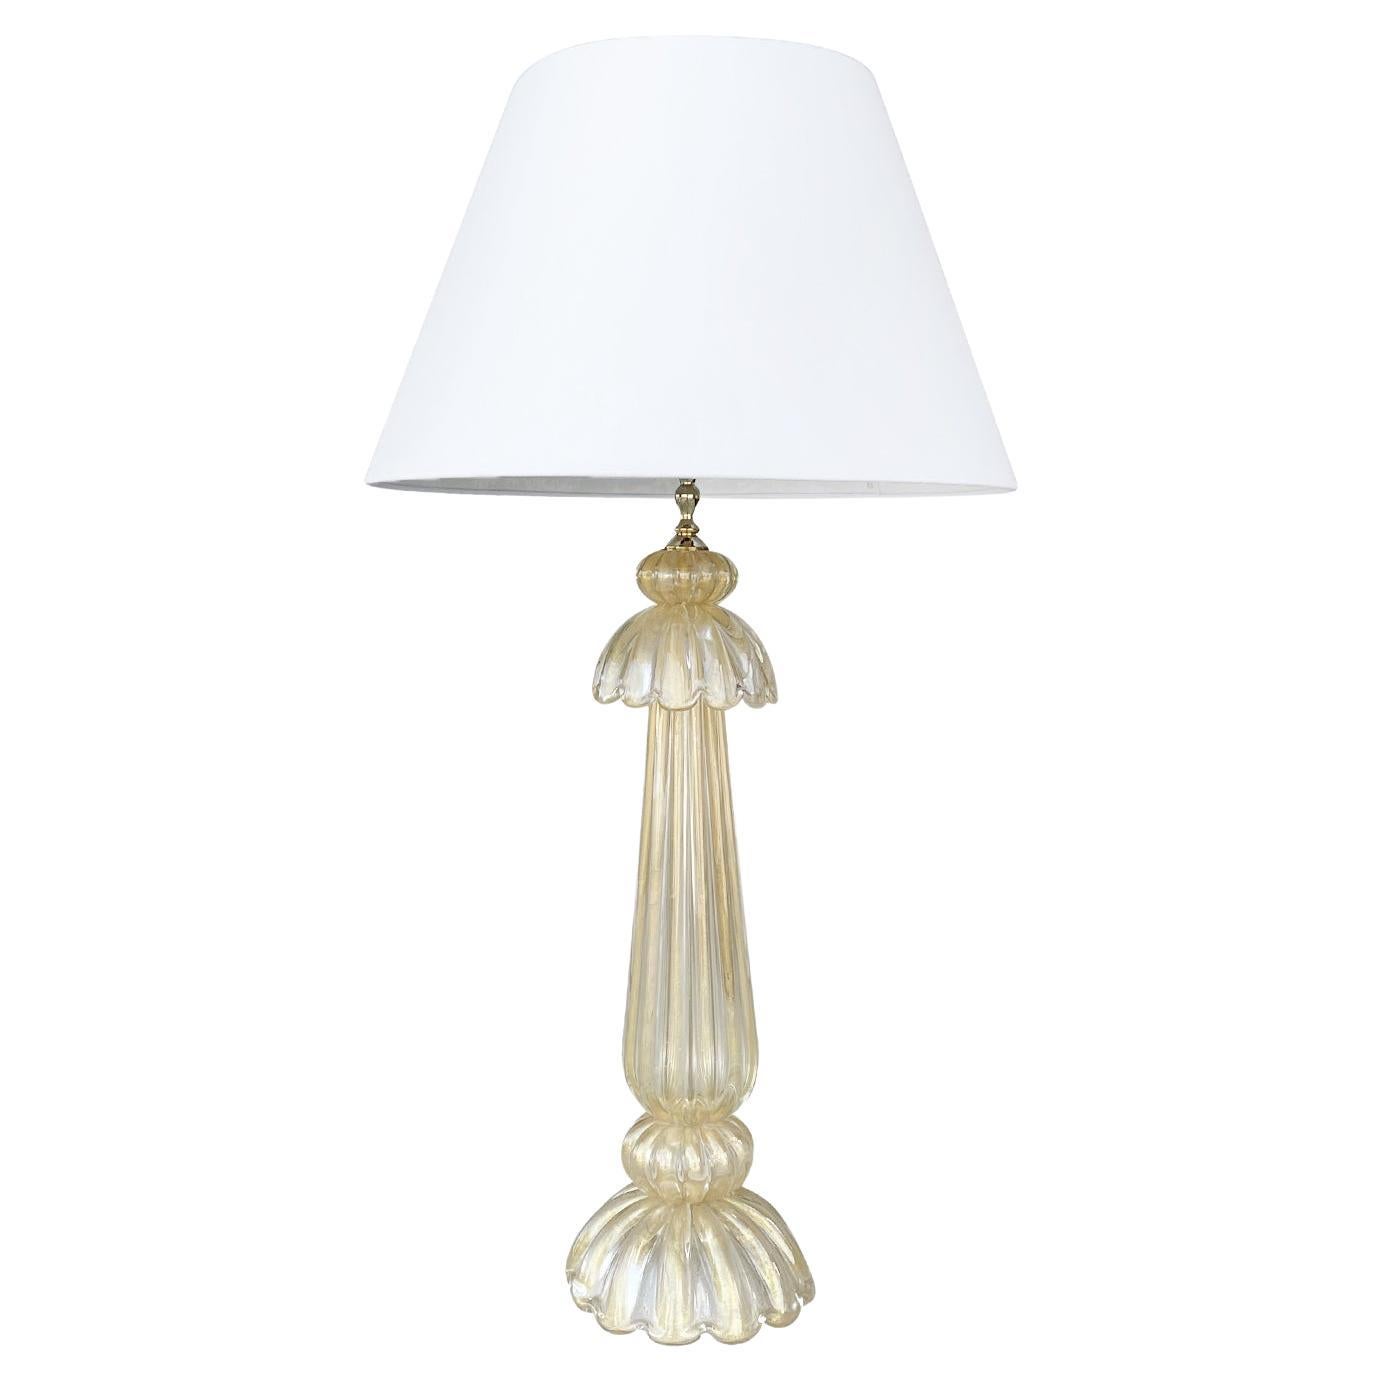 20th Century Italian Tall Vintage Murano Glass Table Lamp by Barovier & Toso For Sale